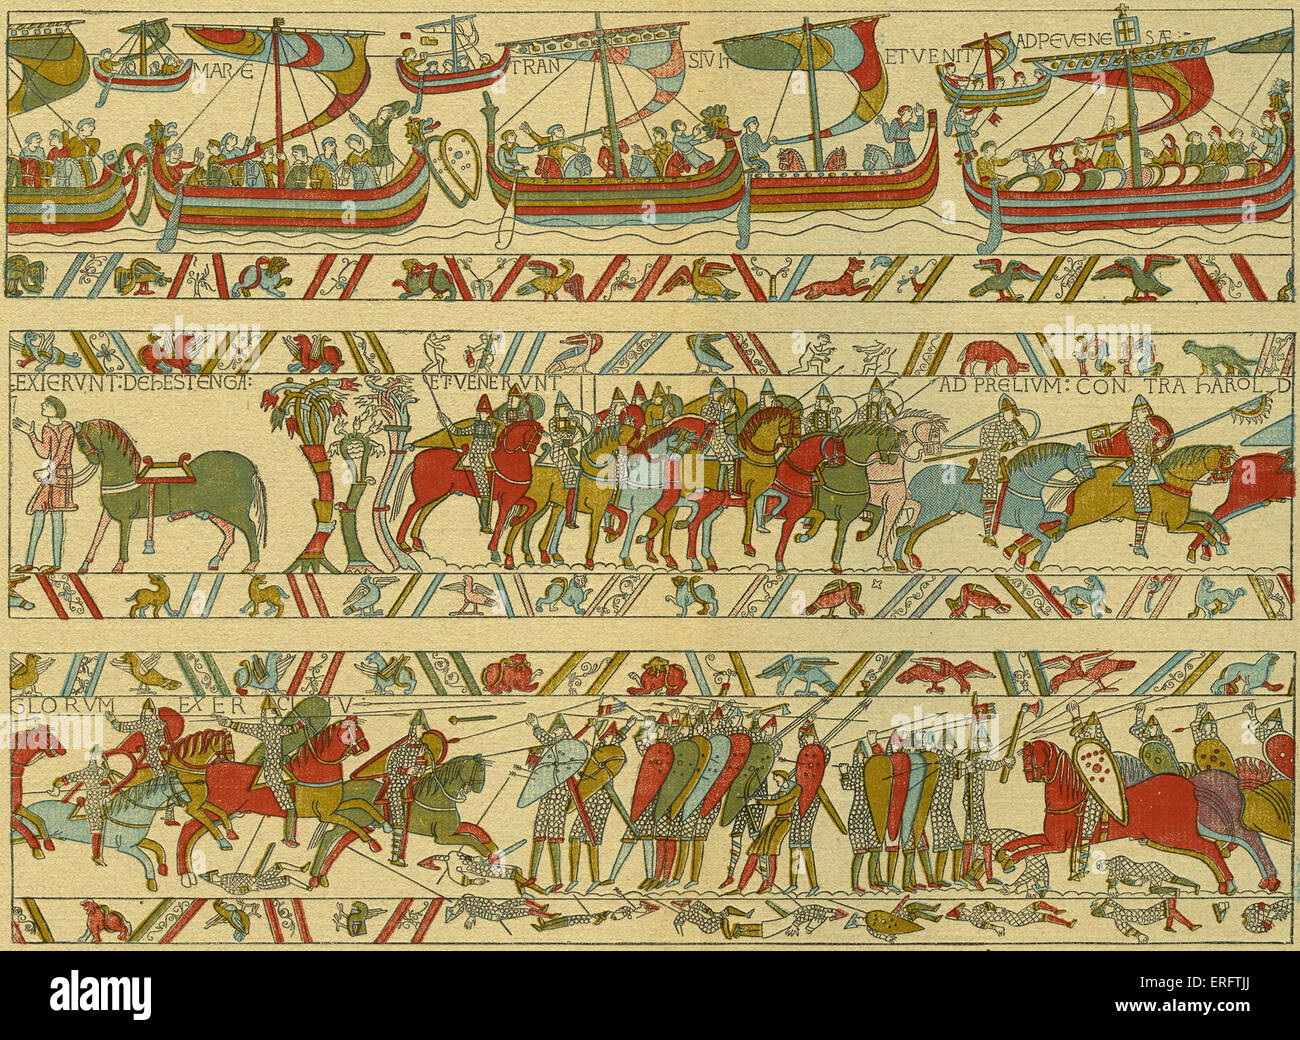 Bayeux tapestry. Norman attack on England - William the conqueror 's fleet crossing the Channel to invade England. Scenes of Stock Photo